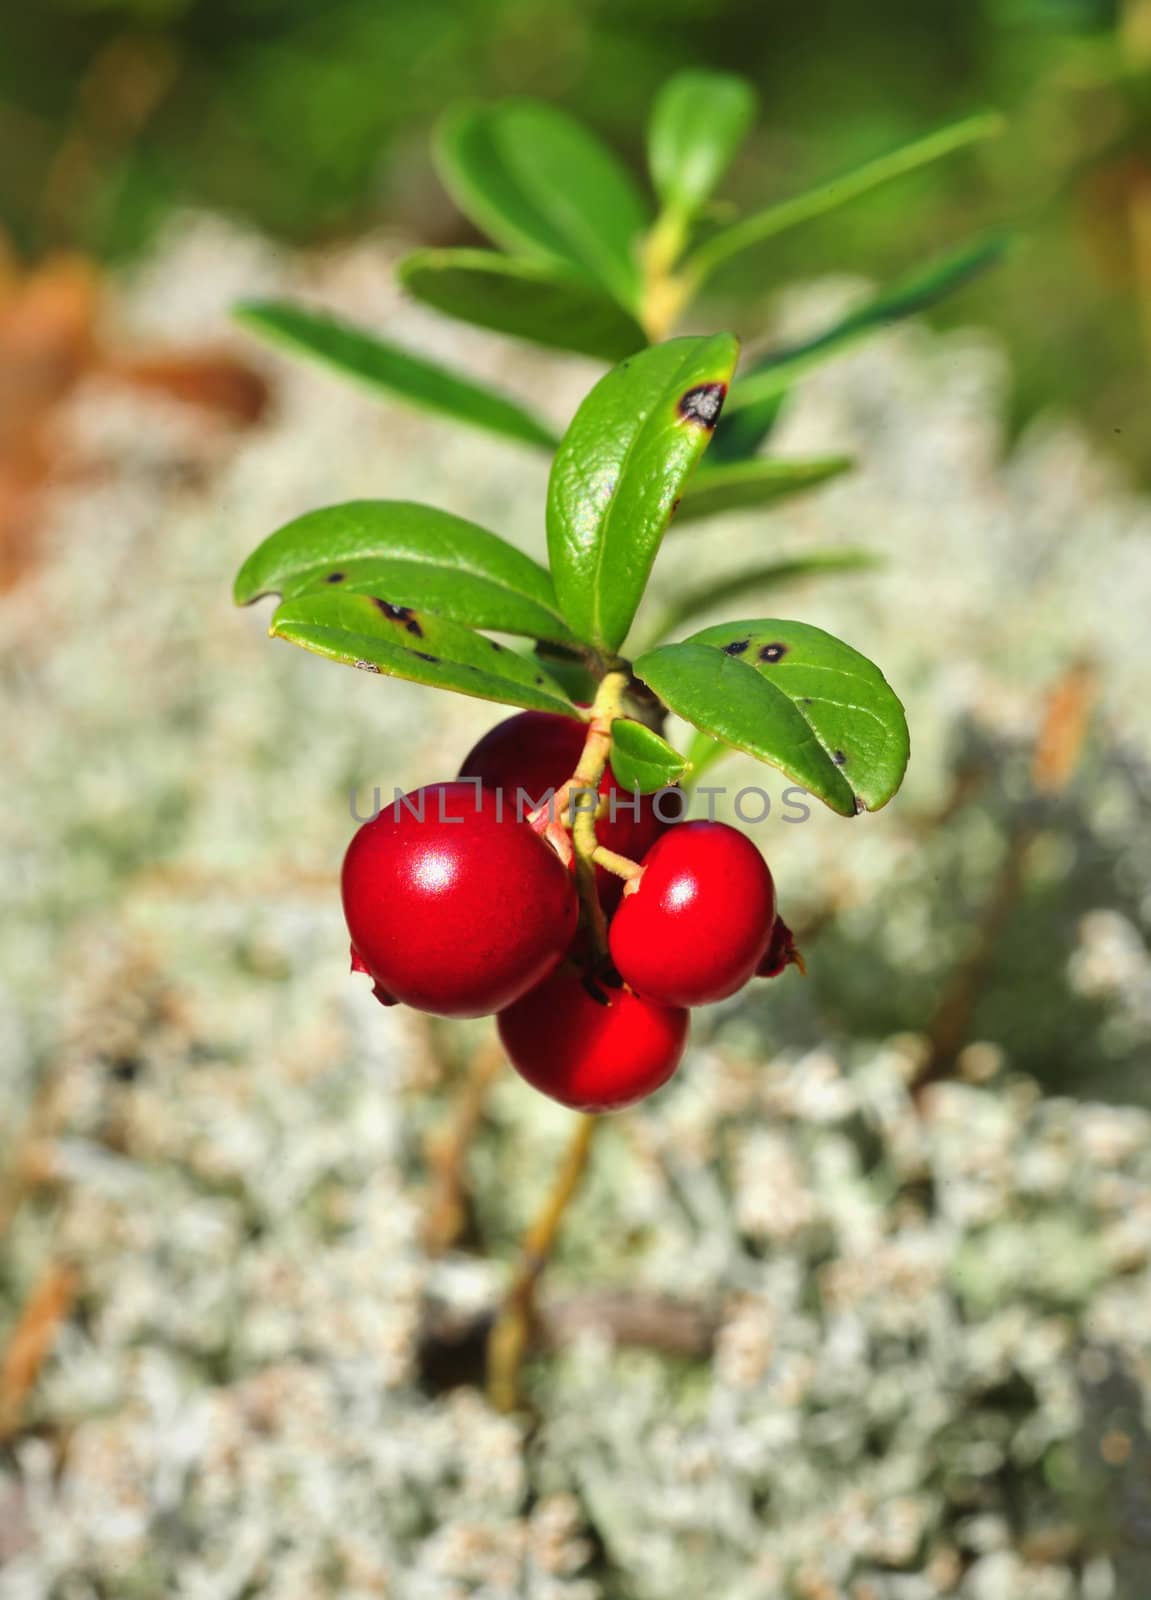 Cowberry or lingonberry (Vaccinium vitis-idaea ). Brightly red berries a cowberry in greens